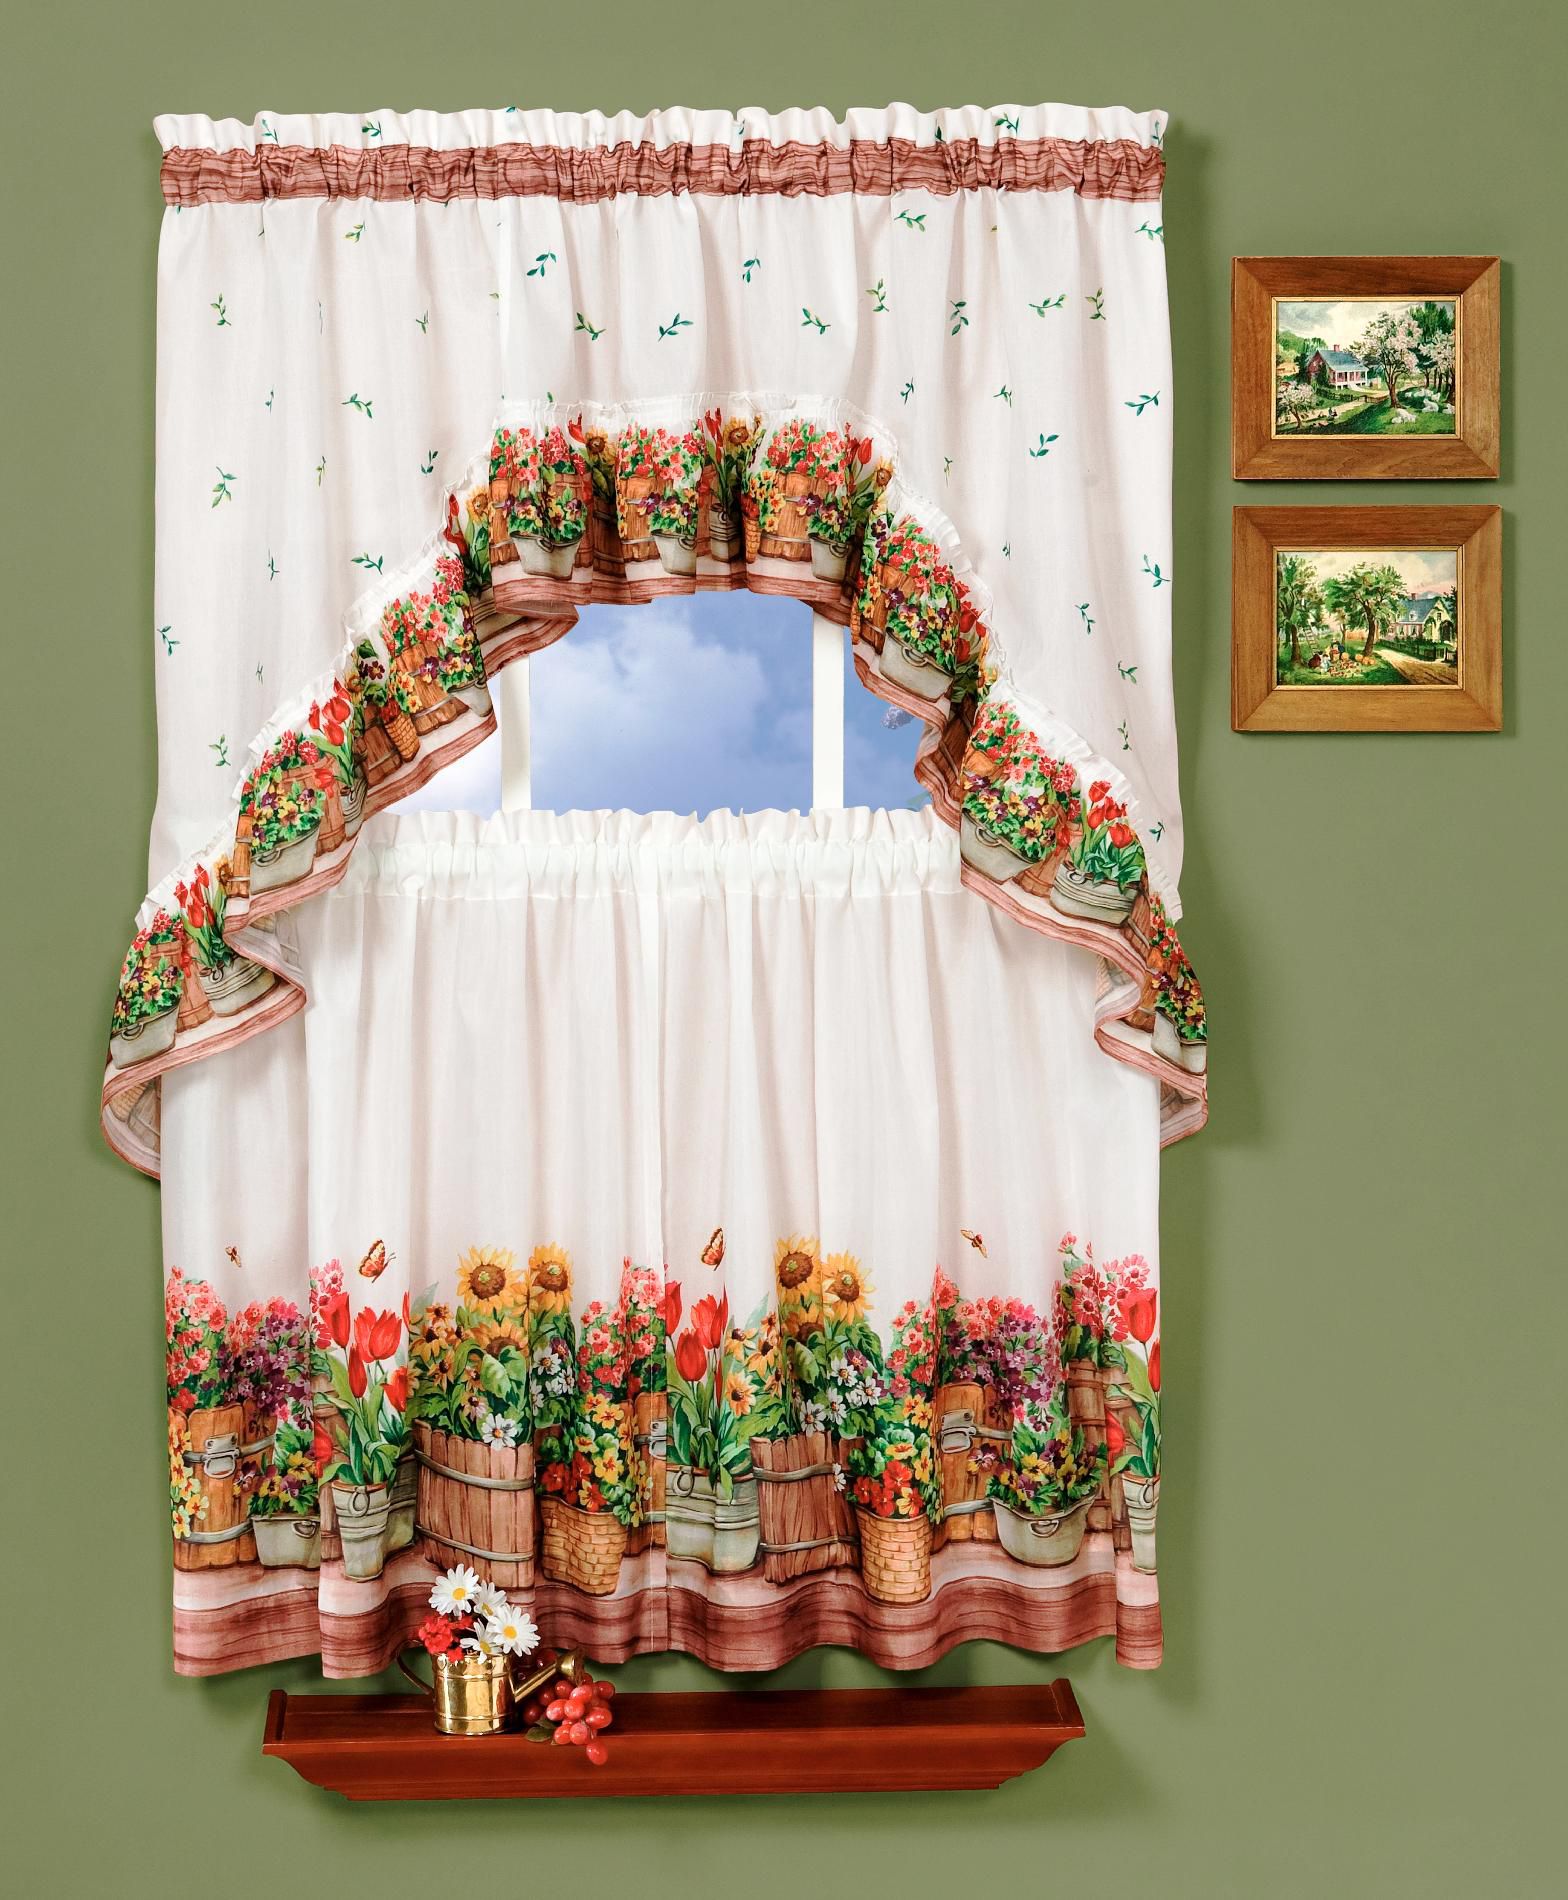 Country Garden - Printed Tier and Swag Set - Multi Available in 57" x 24" and 57" x 36"